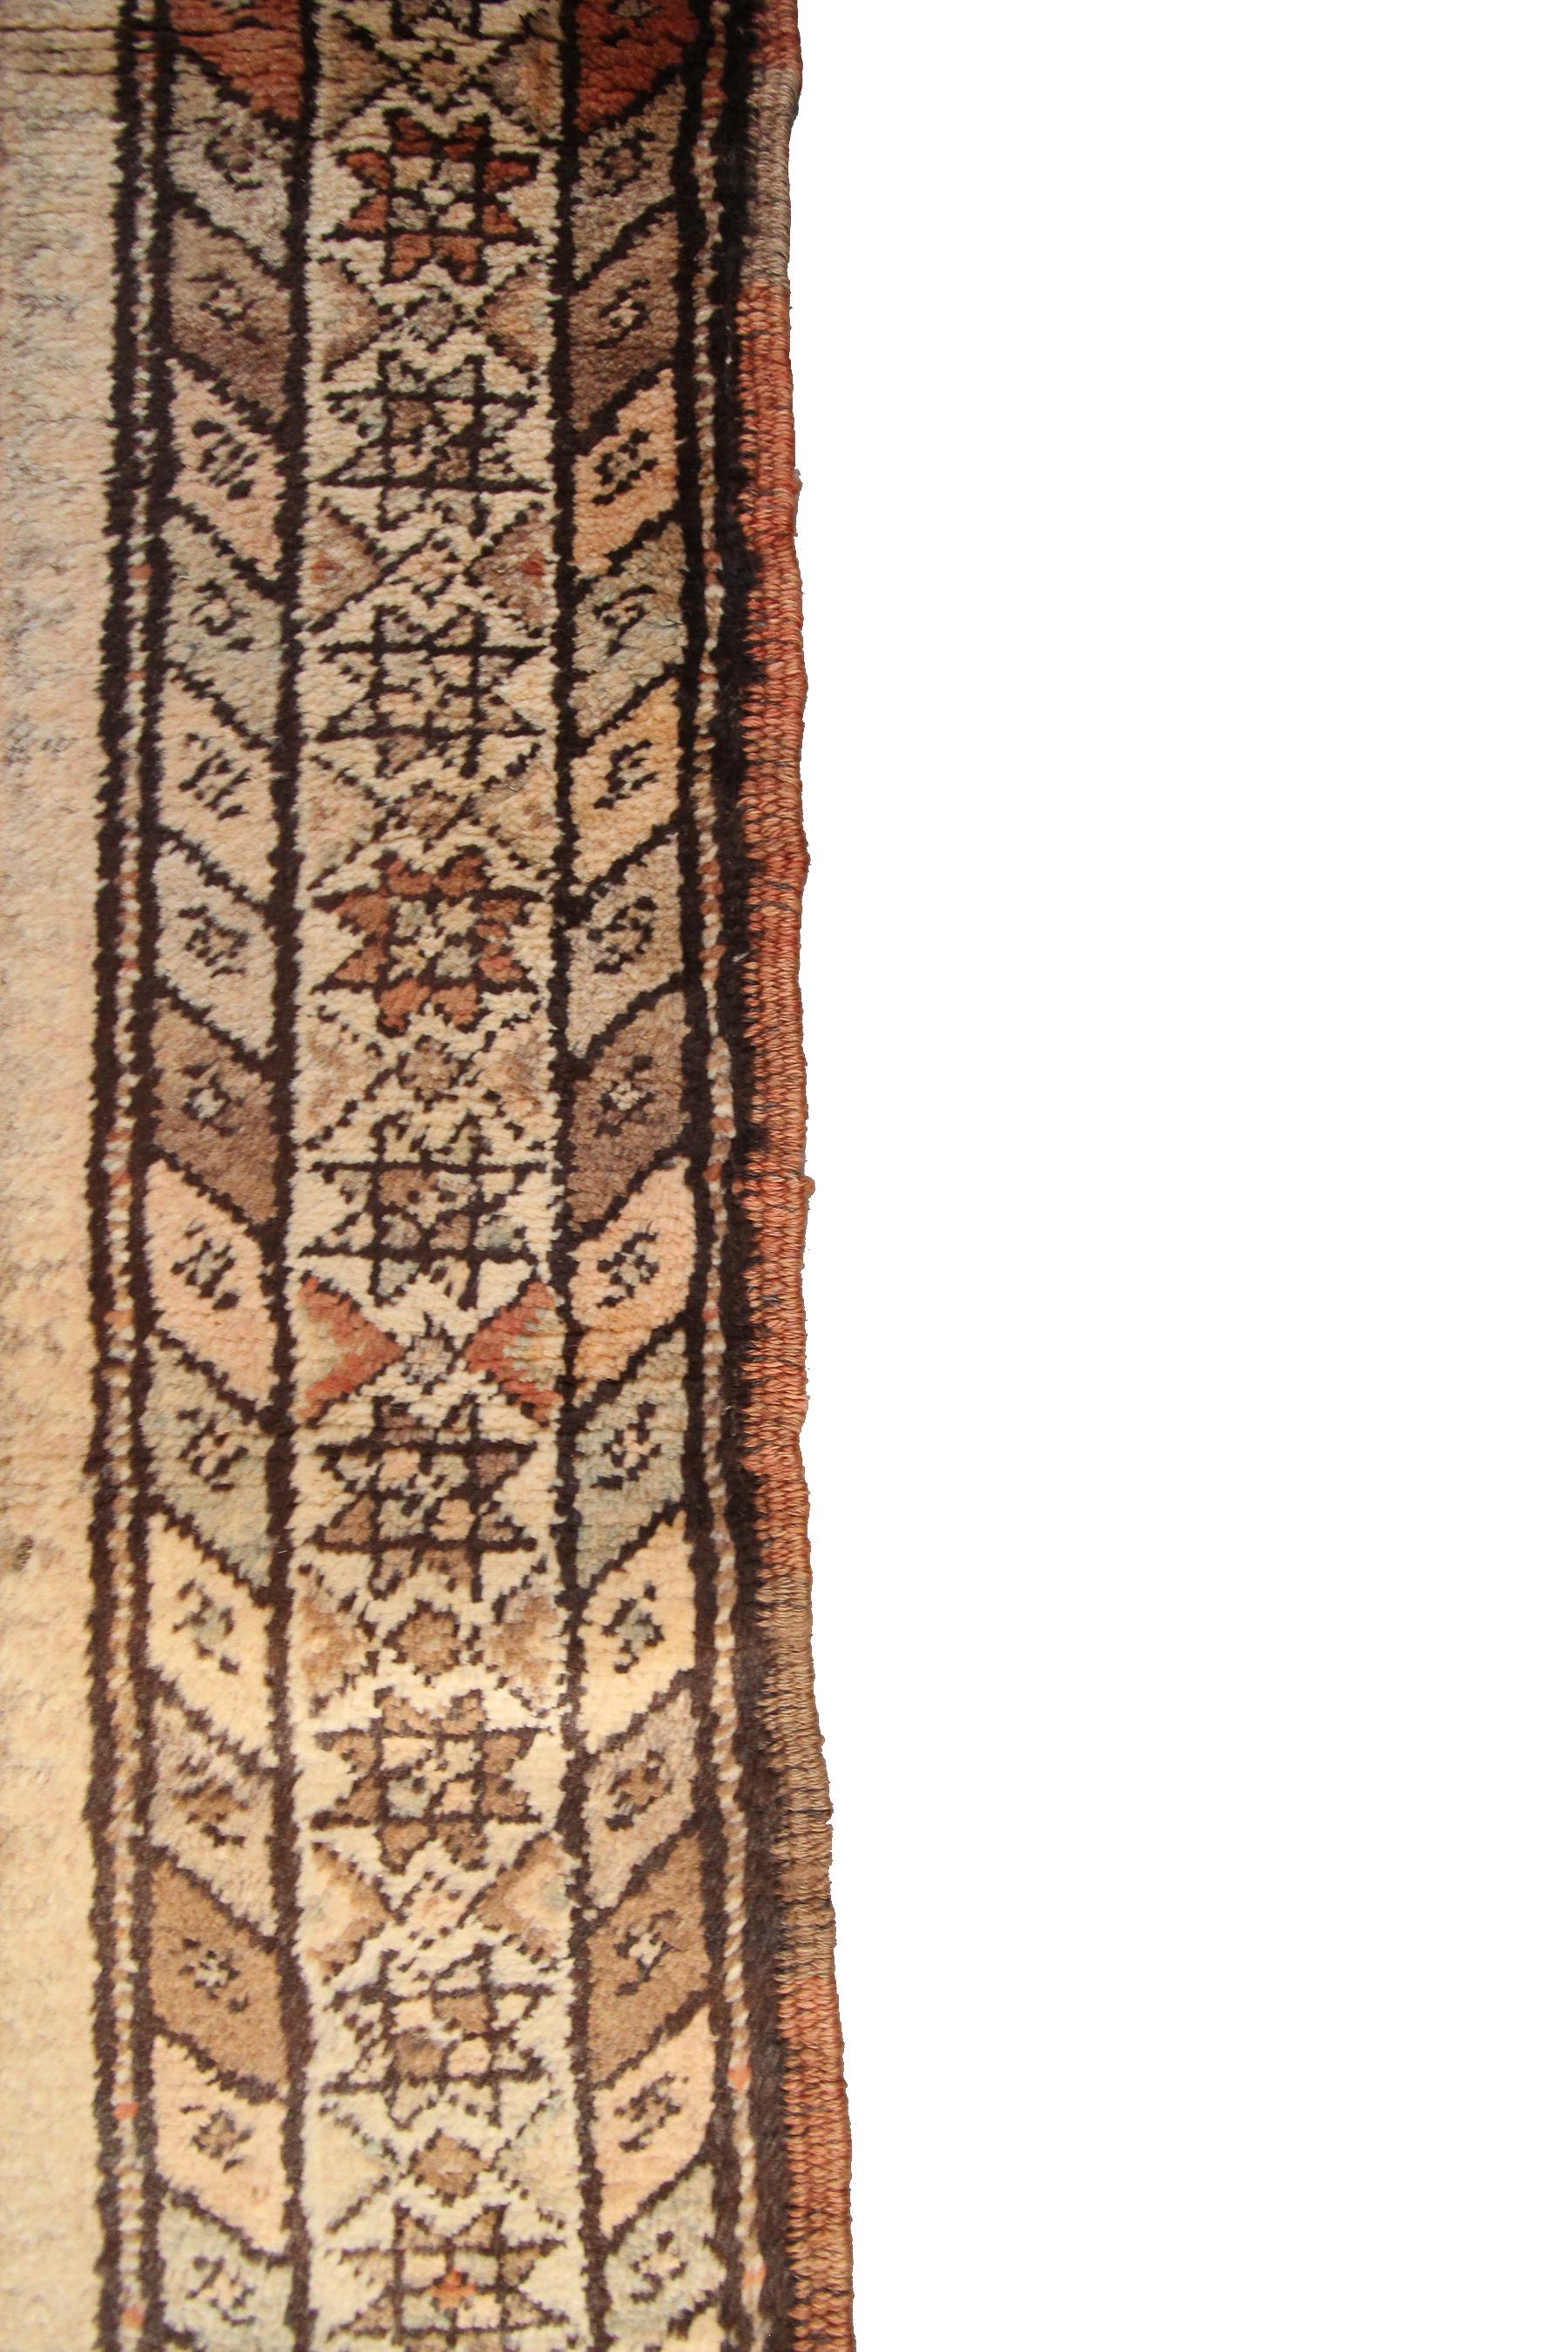 Antique Persian Rug Antique Persian Runner Sarab Runner 3x14 Wool Foundation For Sale 4